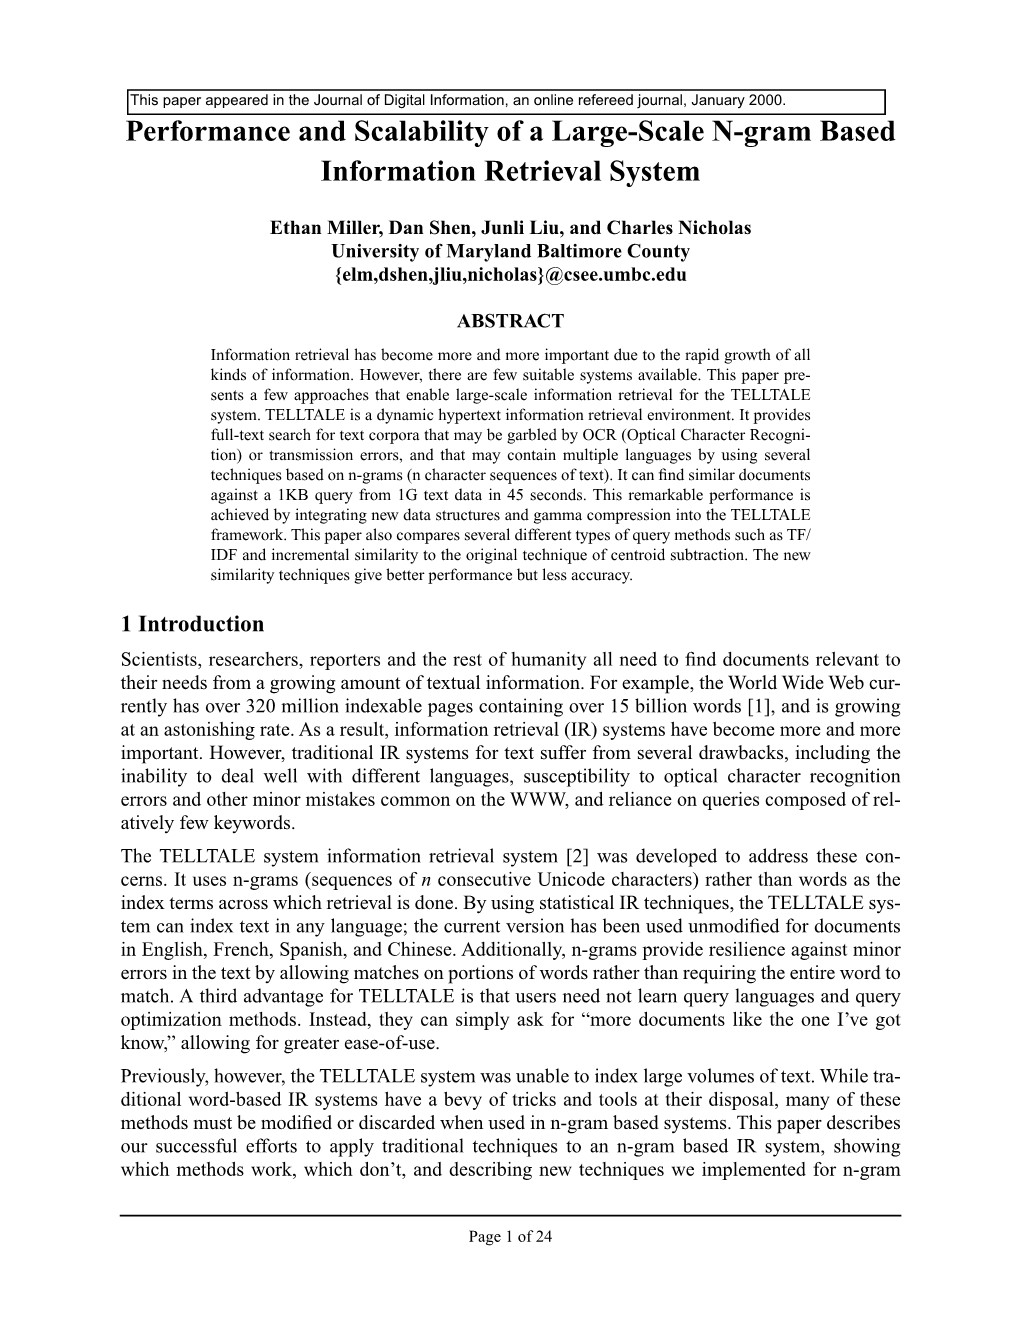 Performance and Scalability of a Large-Scale N-Gram Based Information Retrieval System